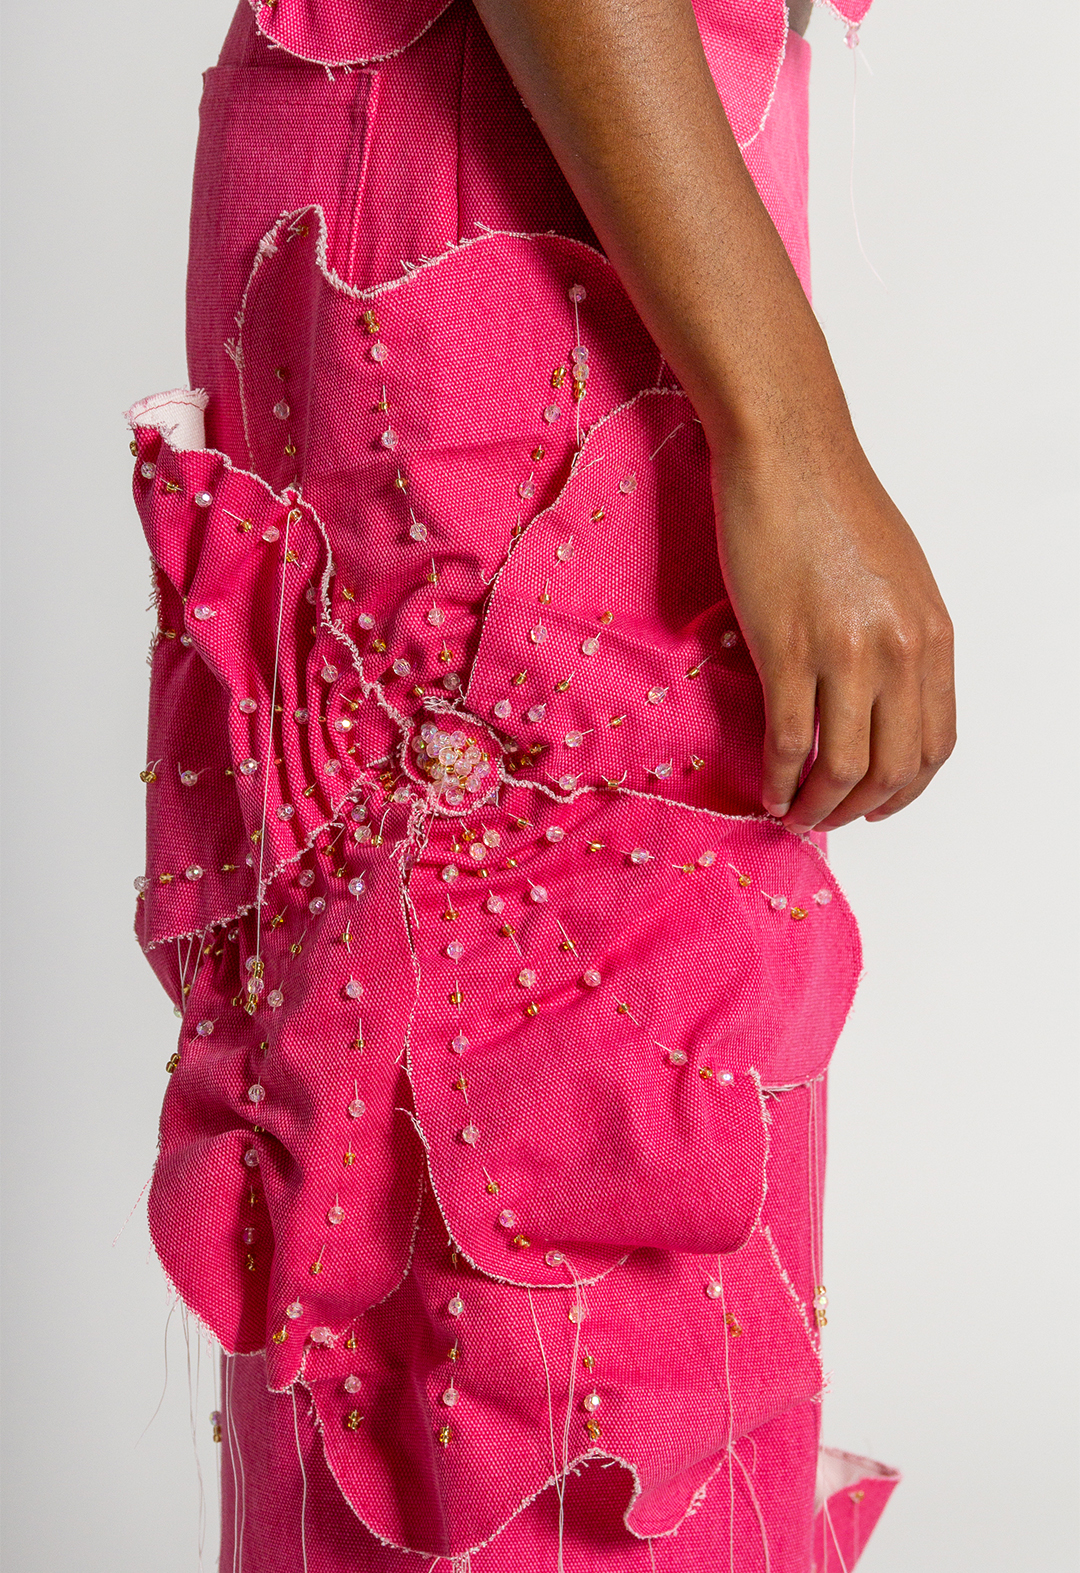 Right leg pants side view: Embellished flower with gold and iridescent pink beads.